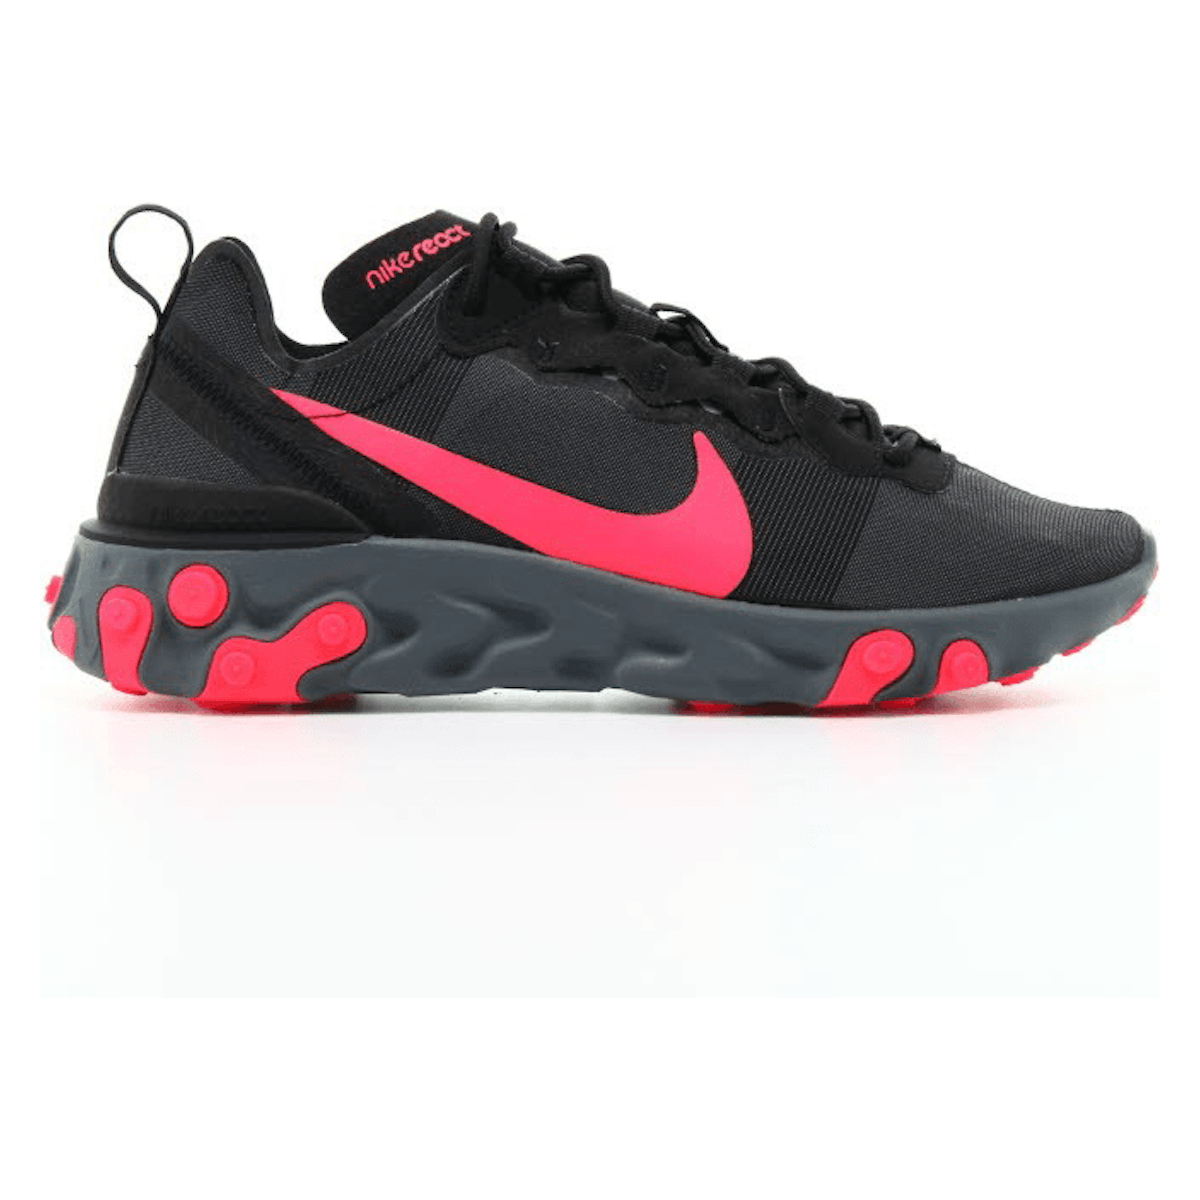 Nike WMNS React Element 55 "Solar Red"